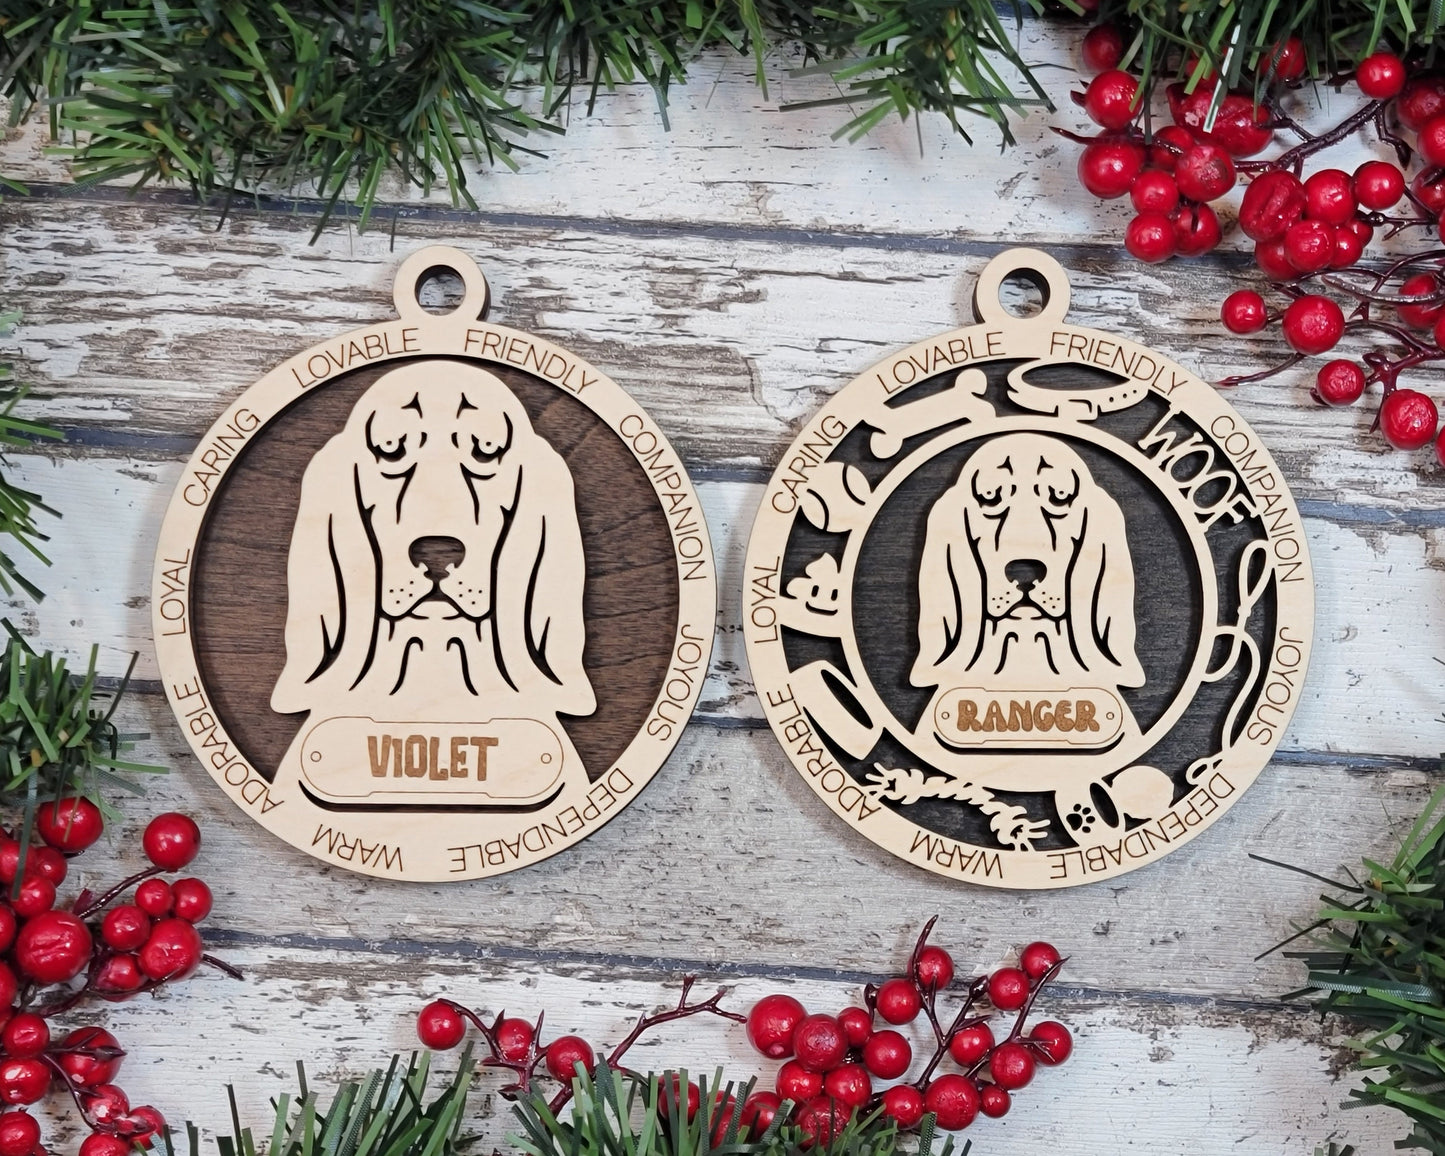 Basset Hound - Adorable Dog Ornaments - 2 Ornaments included - SVG, PDF, AI File Download - Sized for Glowforge